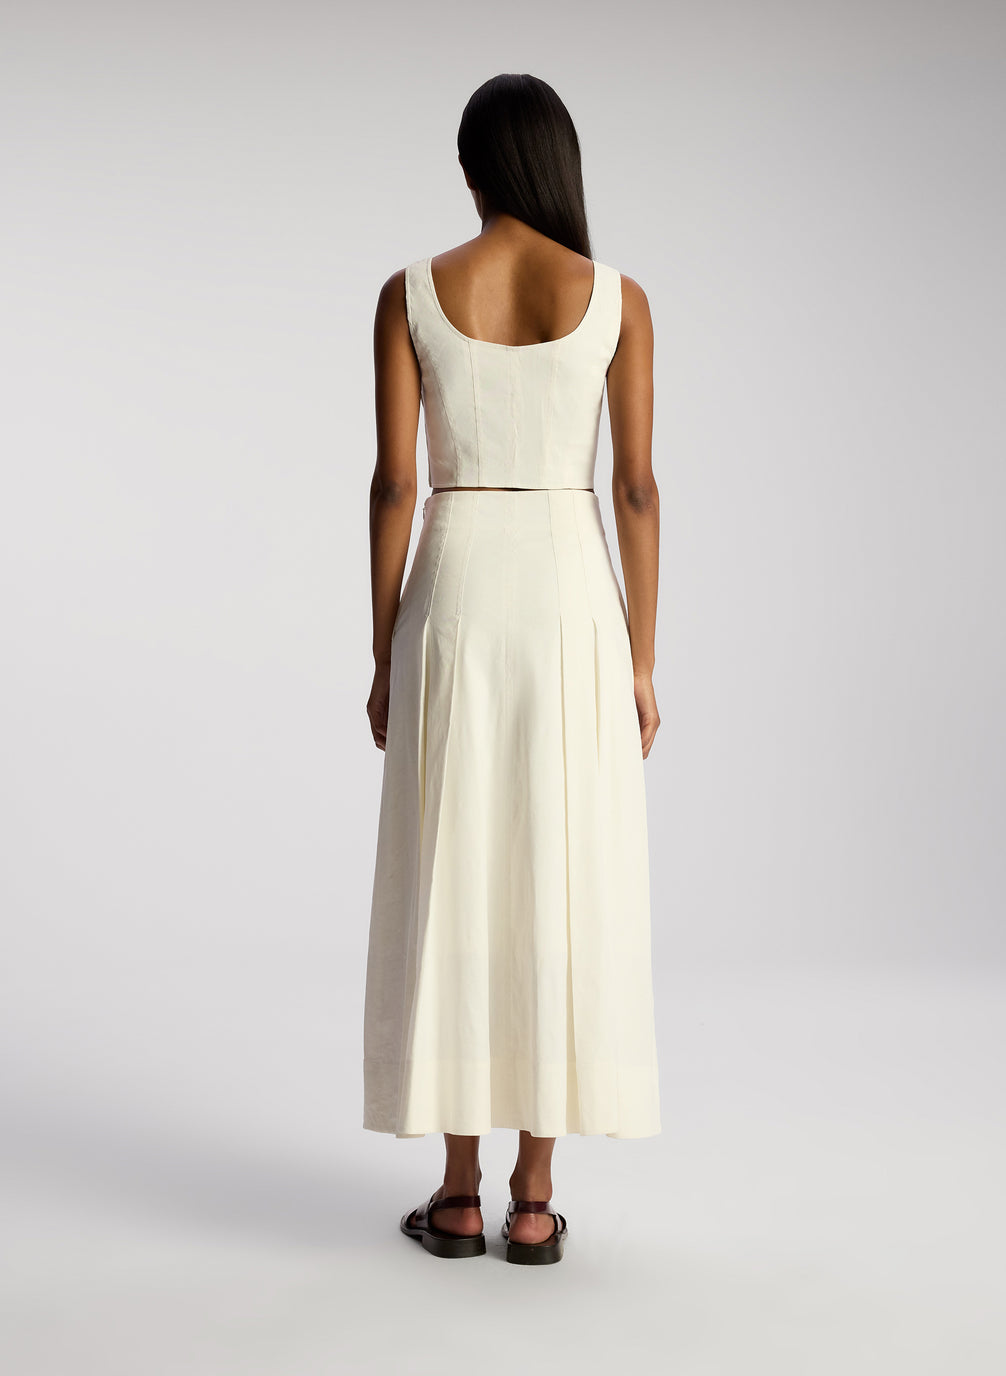 back view of woman wearing white sleeveless cropped top and white midi skirt